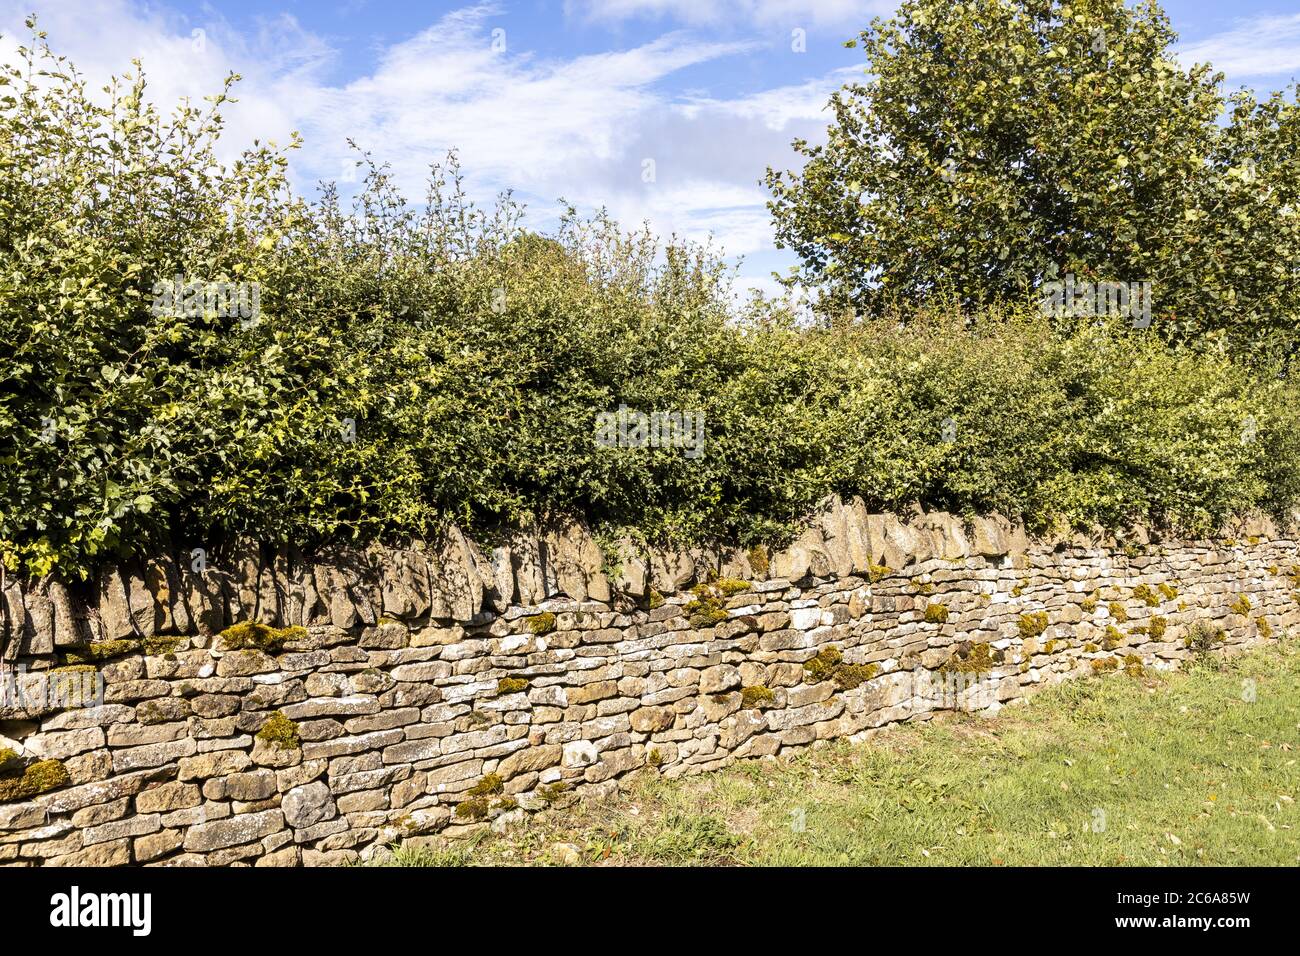 A hawthorn hedge growing behind a traditional dry stone wall near the Cotswold village of Guiting Power,  Gloucestershire UK Stock Photo